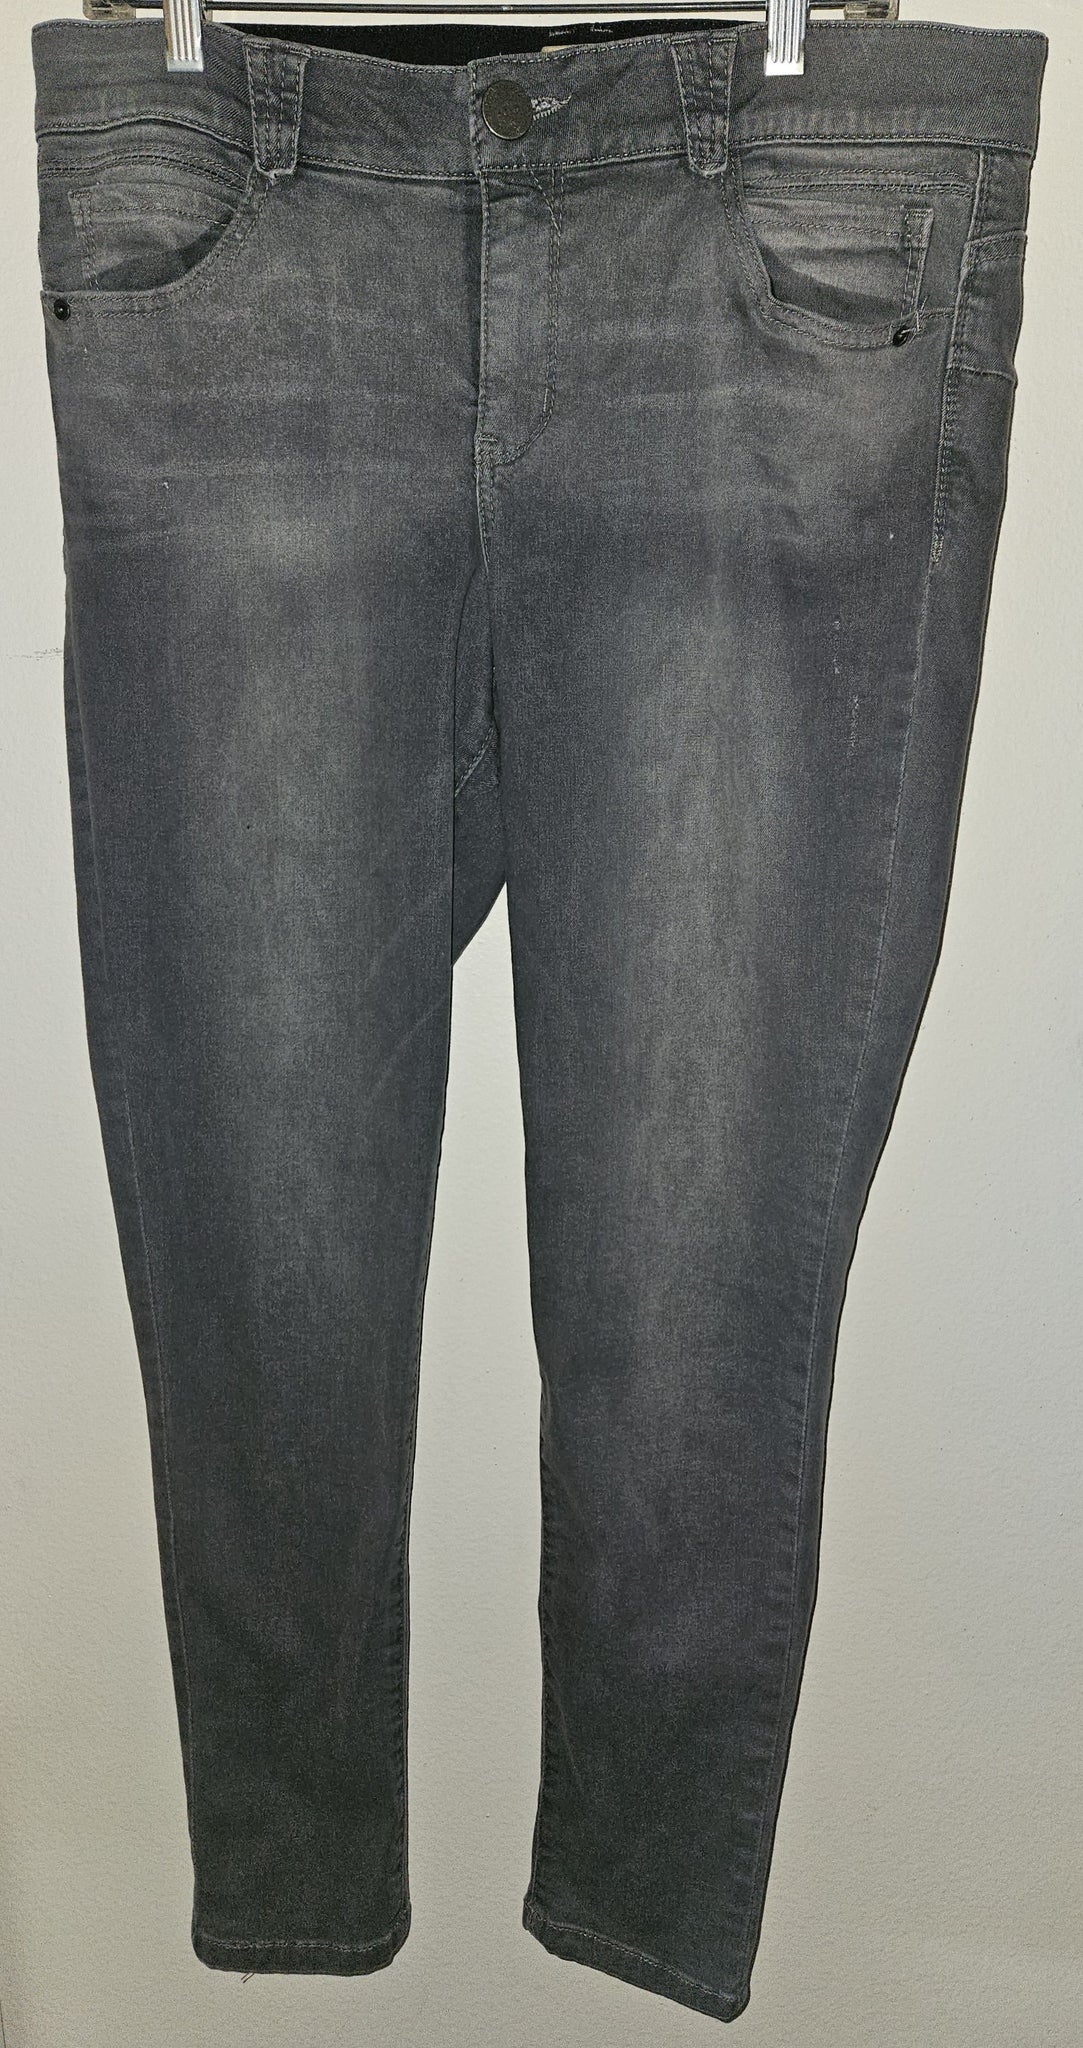 Size 14 DEMOCRACY Gray "AB" Solution Booty Lift Jeggings